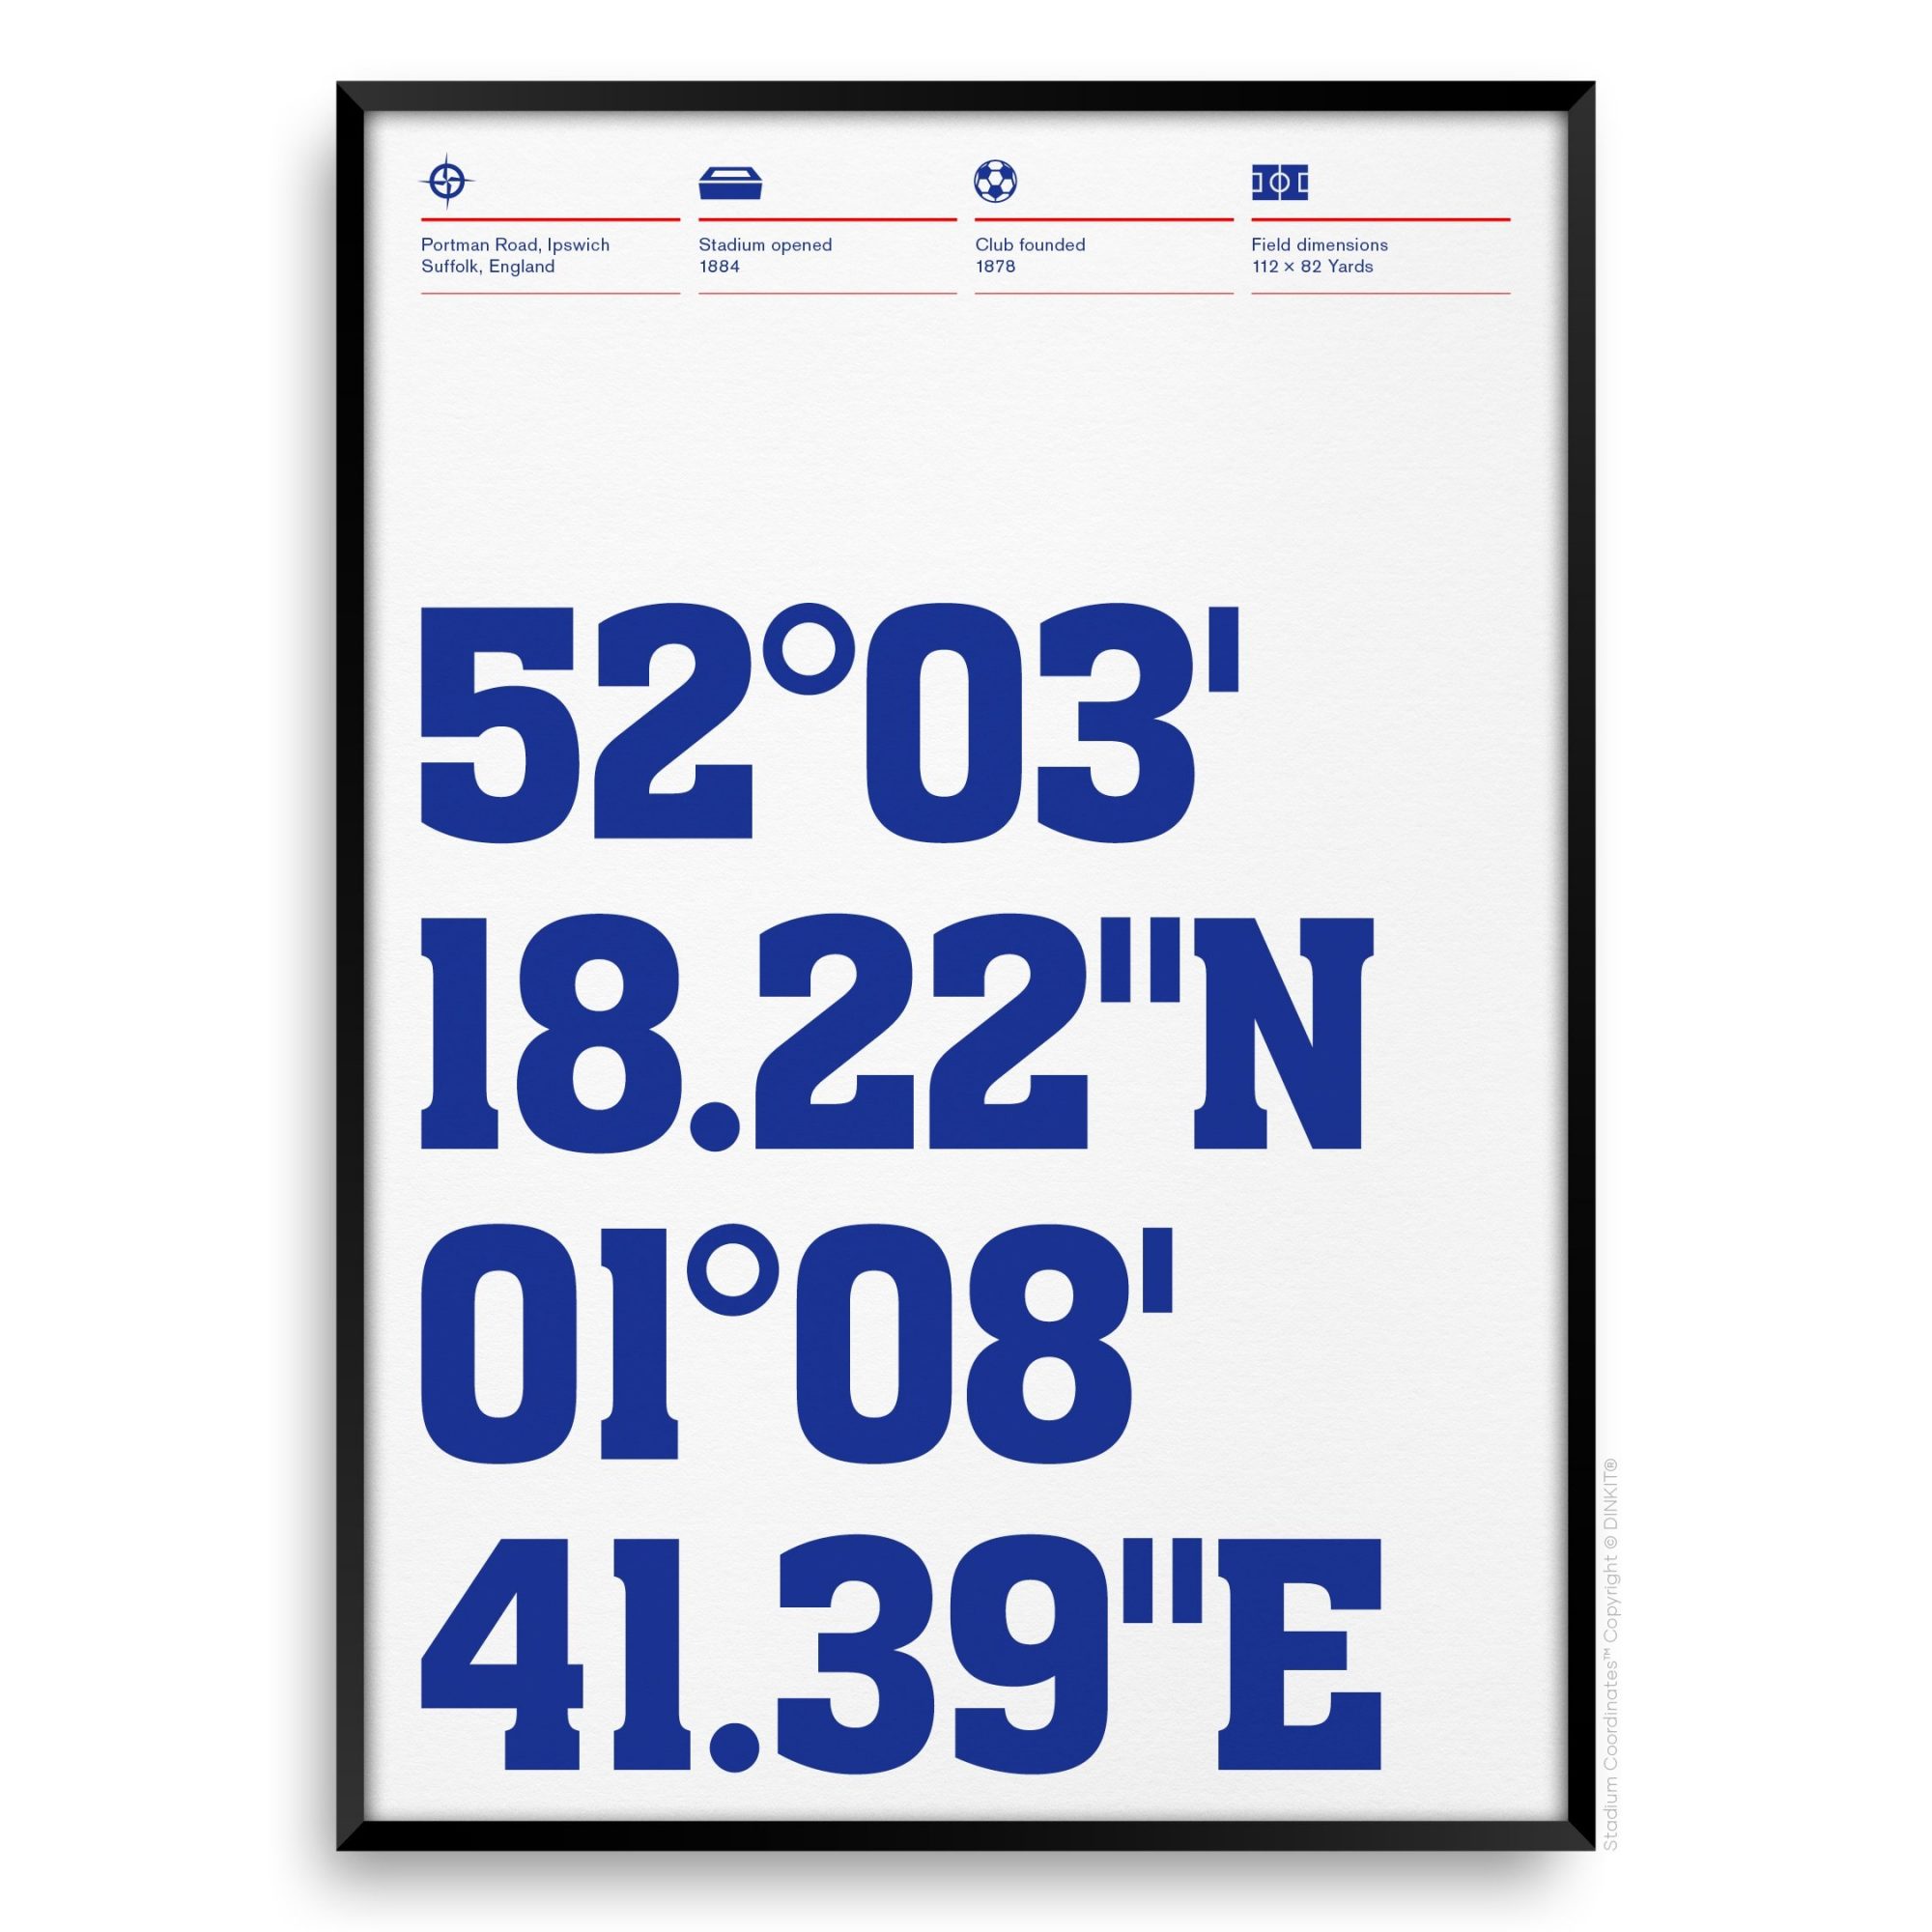 Ipswich Town Gifts, Football Posters, Gift Ideas